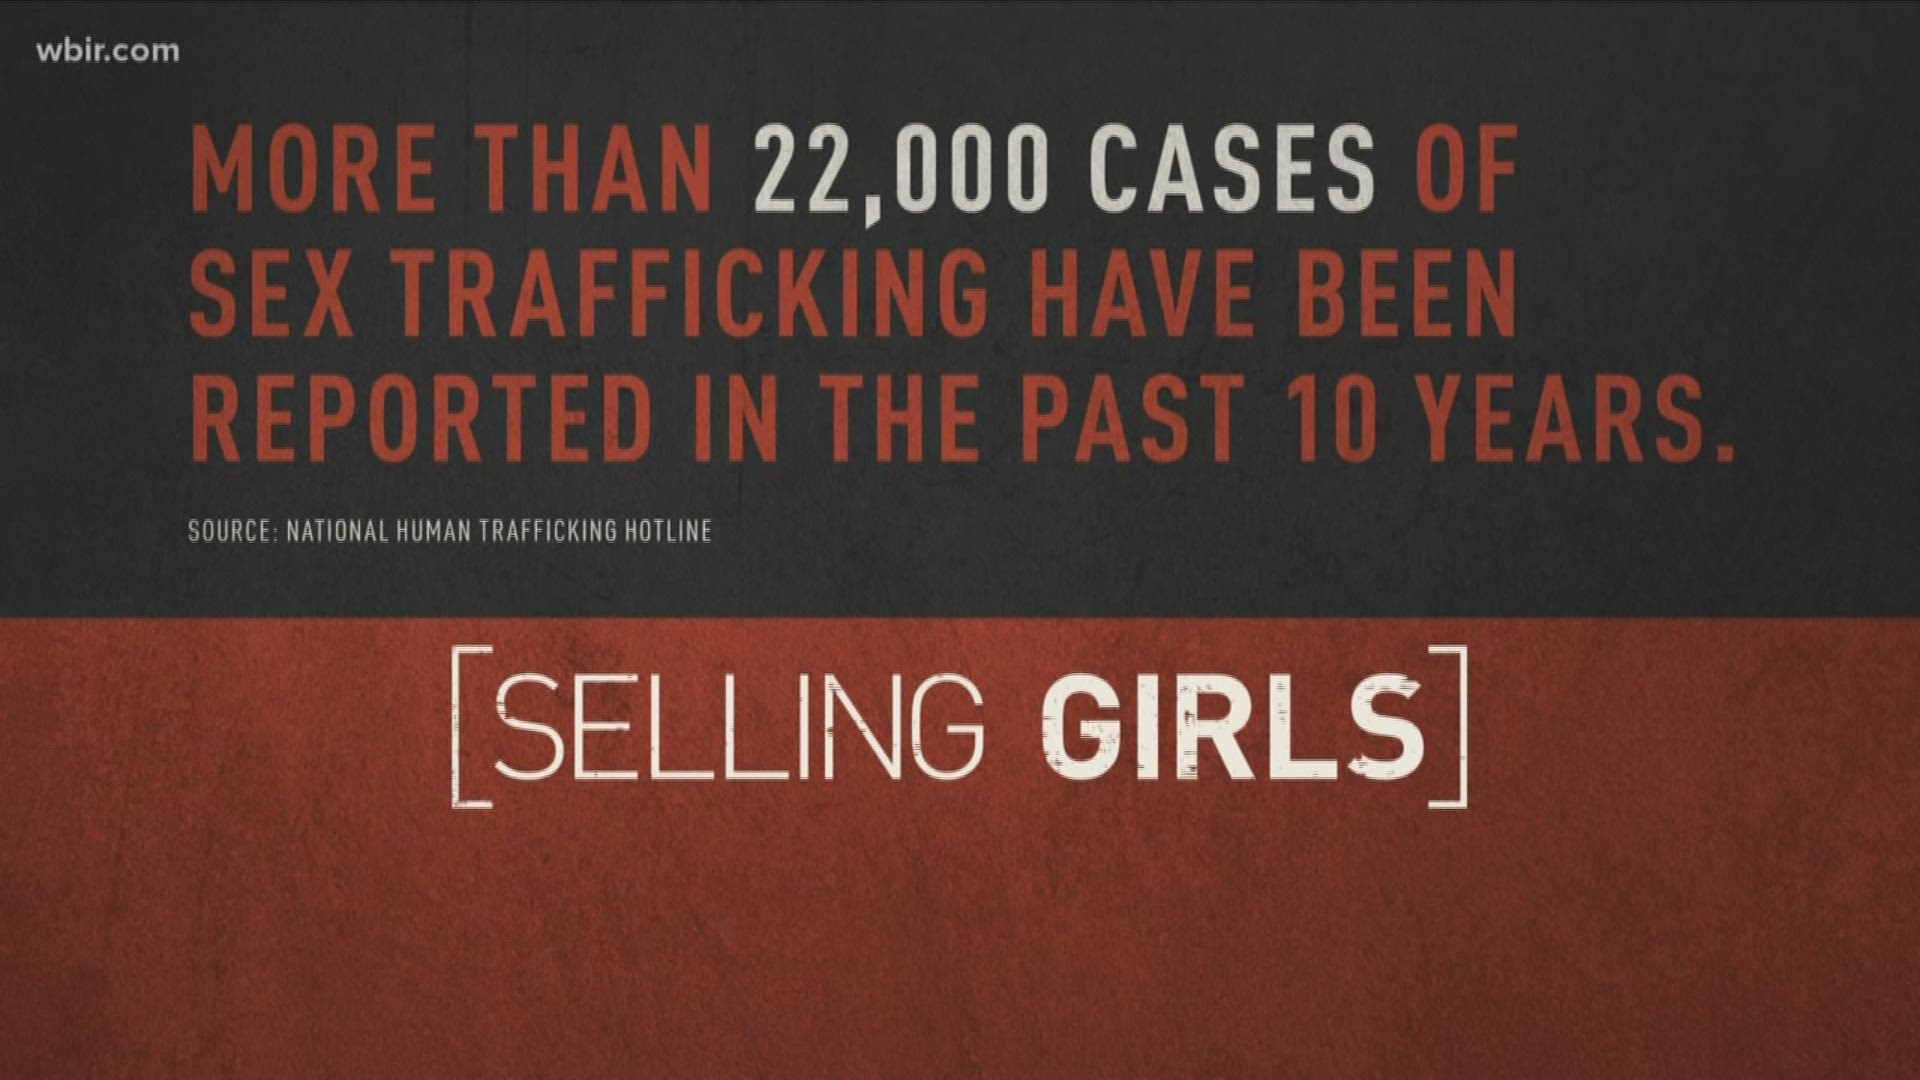 In the last decade authorities say they've recorded more than 22,000 cases of sex trafficking.